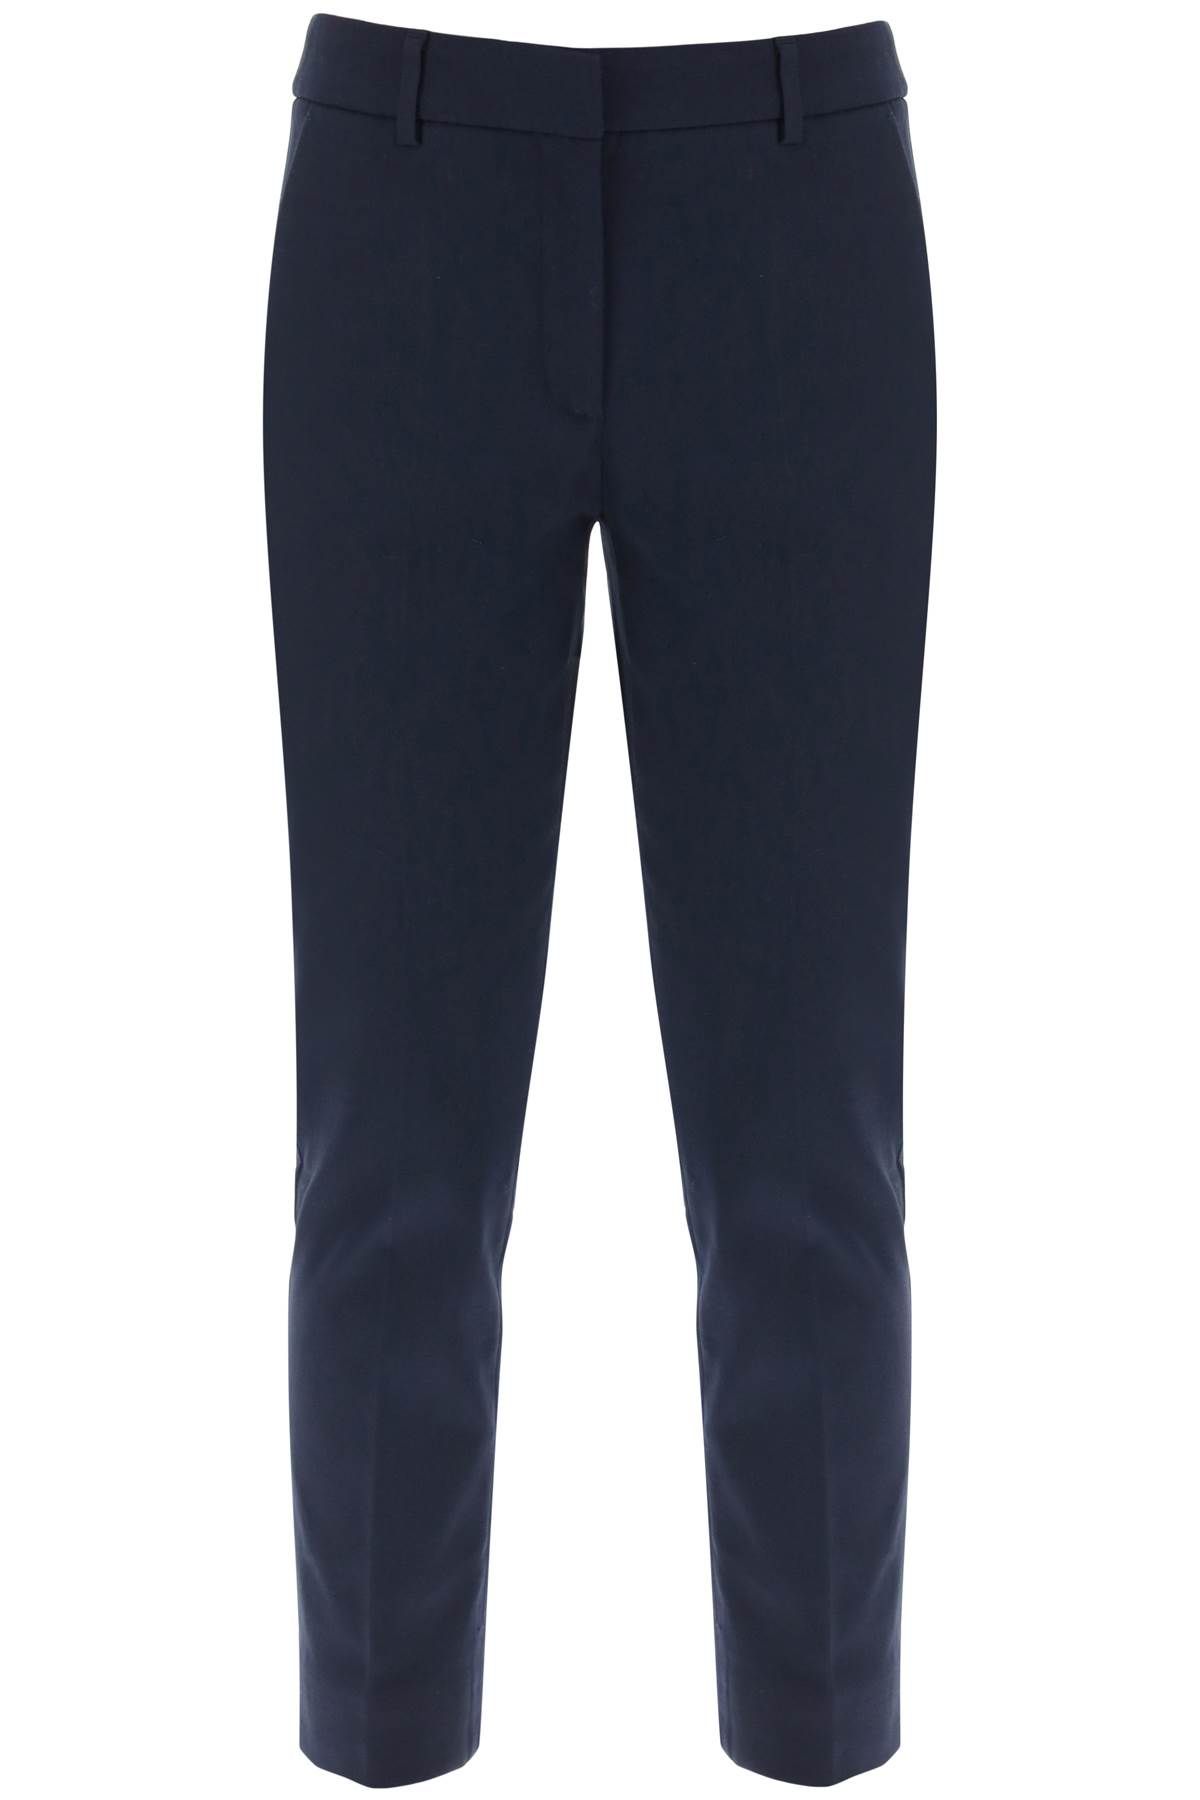 Weekend Max Mara Stretch Cotton Cigarette Pants In Blue